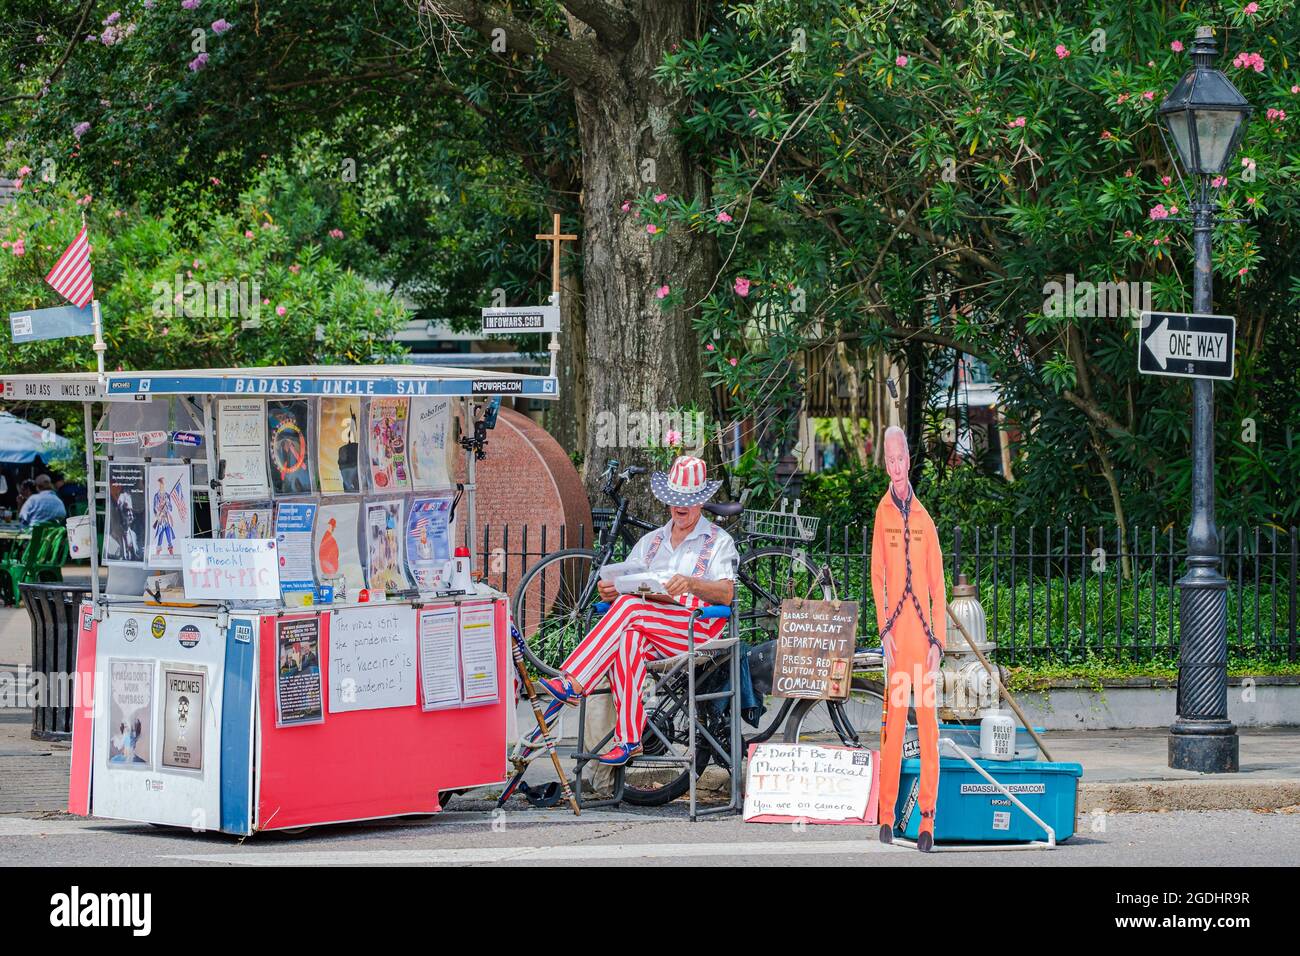 NEW ORLEANS, LA, USA - JULY 31, 2021: Self-proclaimed 'Badass Uncle Sam' sits with his display cart and a Joe Biden cutout as he peddles propaganda Stock Photo